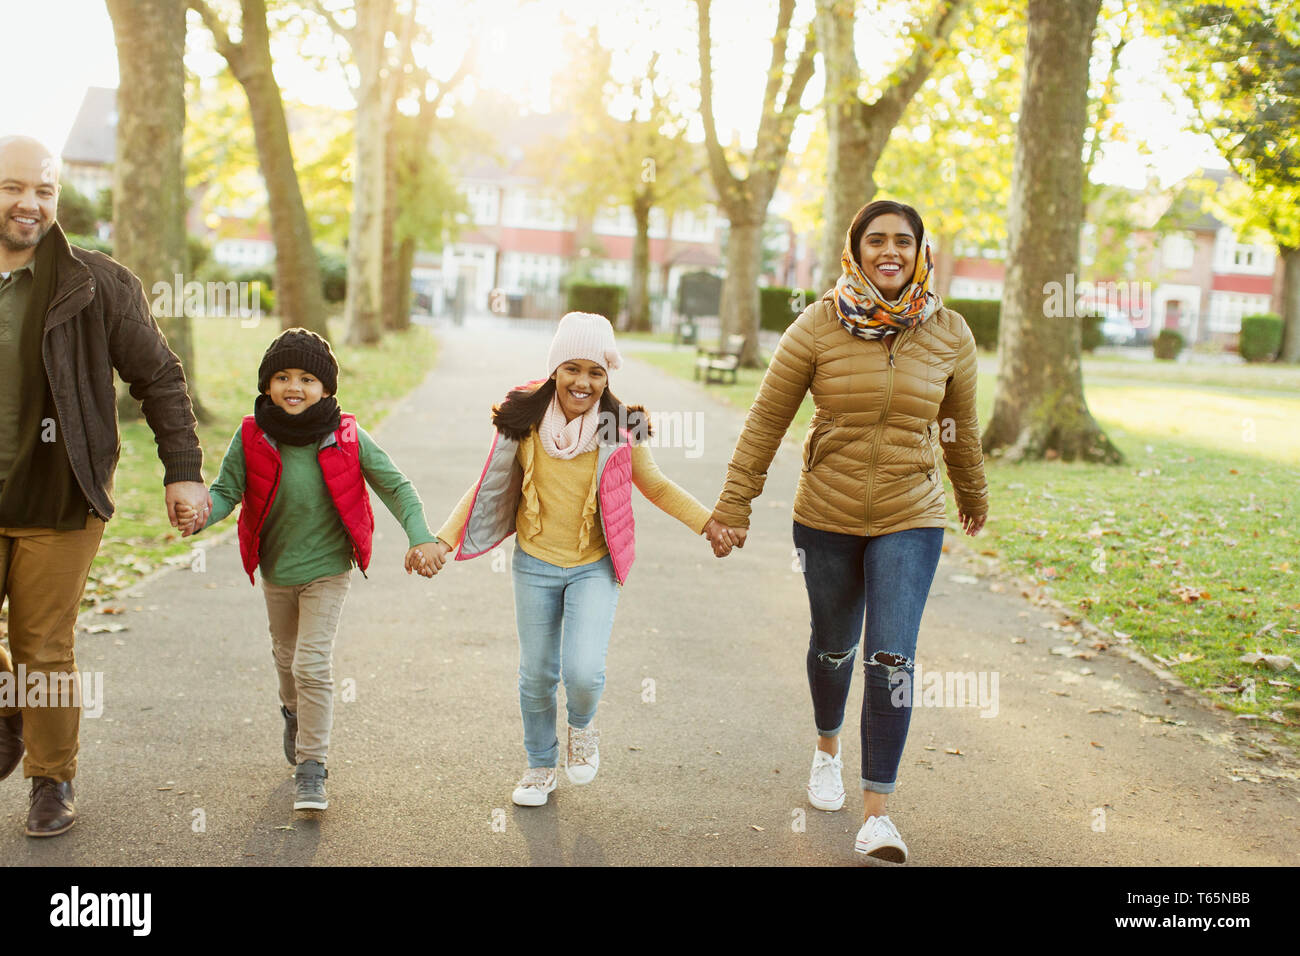 Happy Muslim family holding hands, walking in autumn park Stock Photo